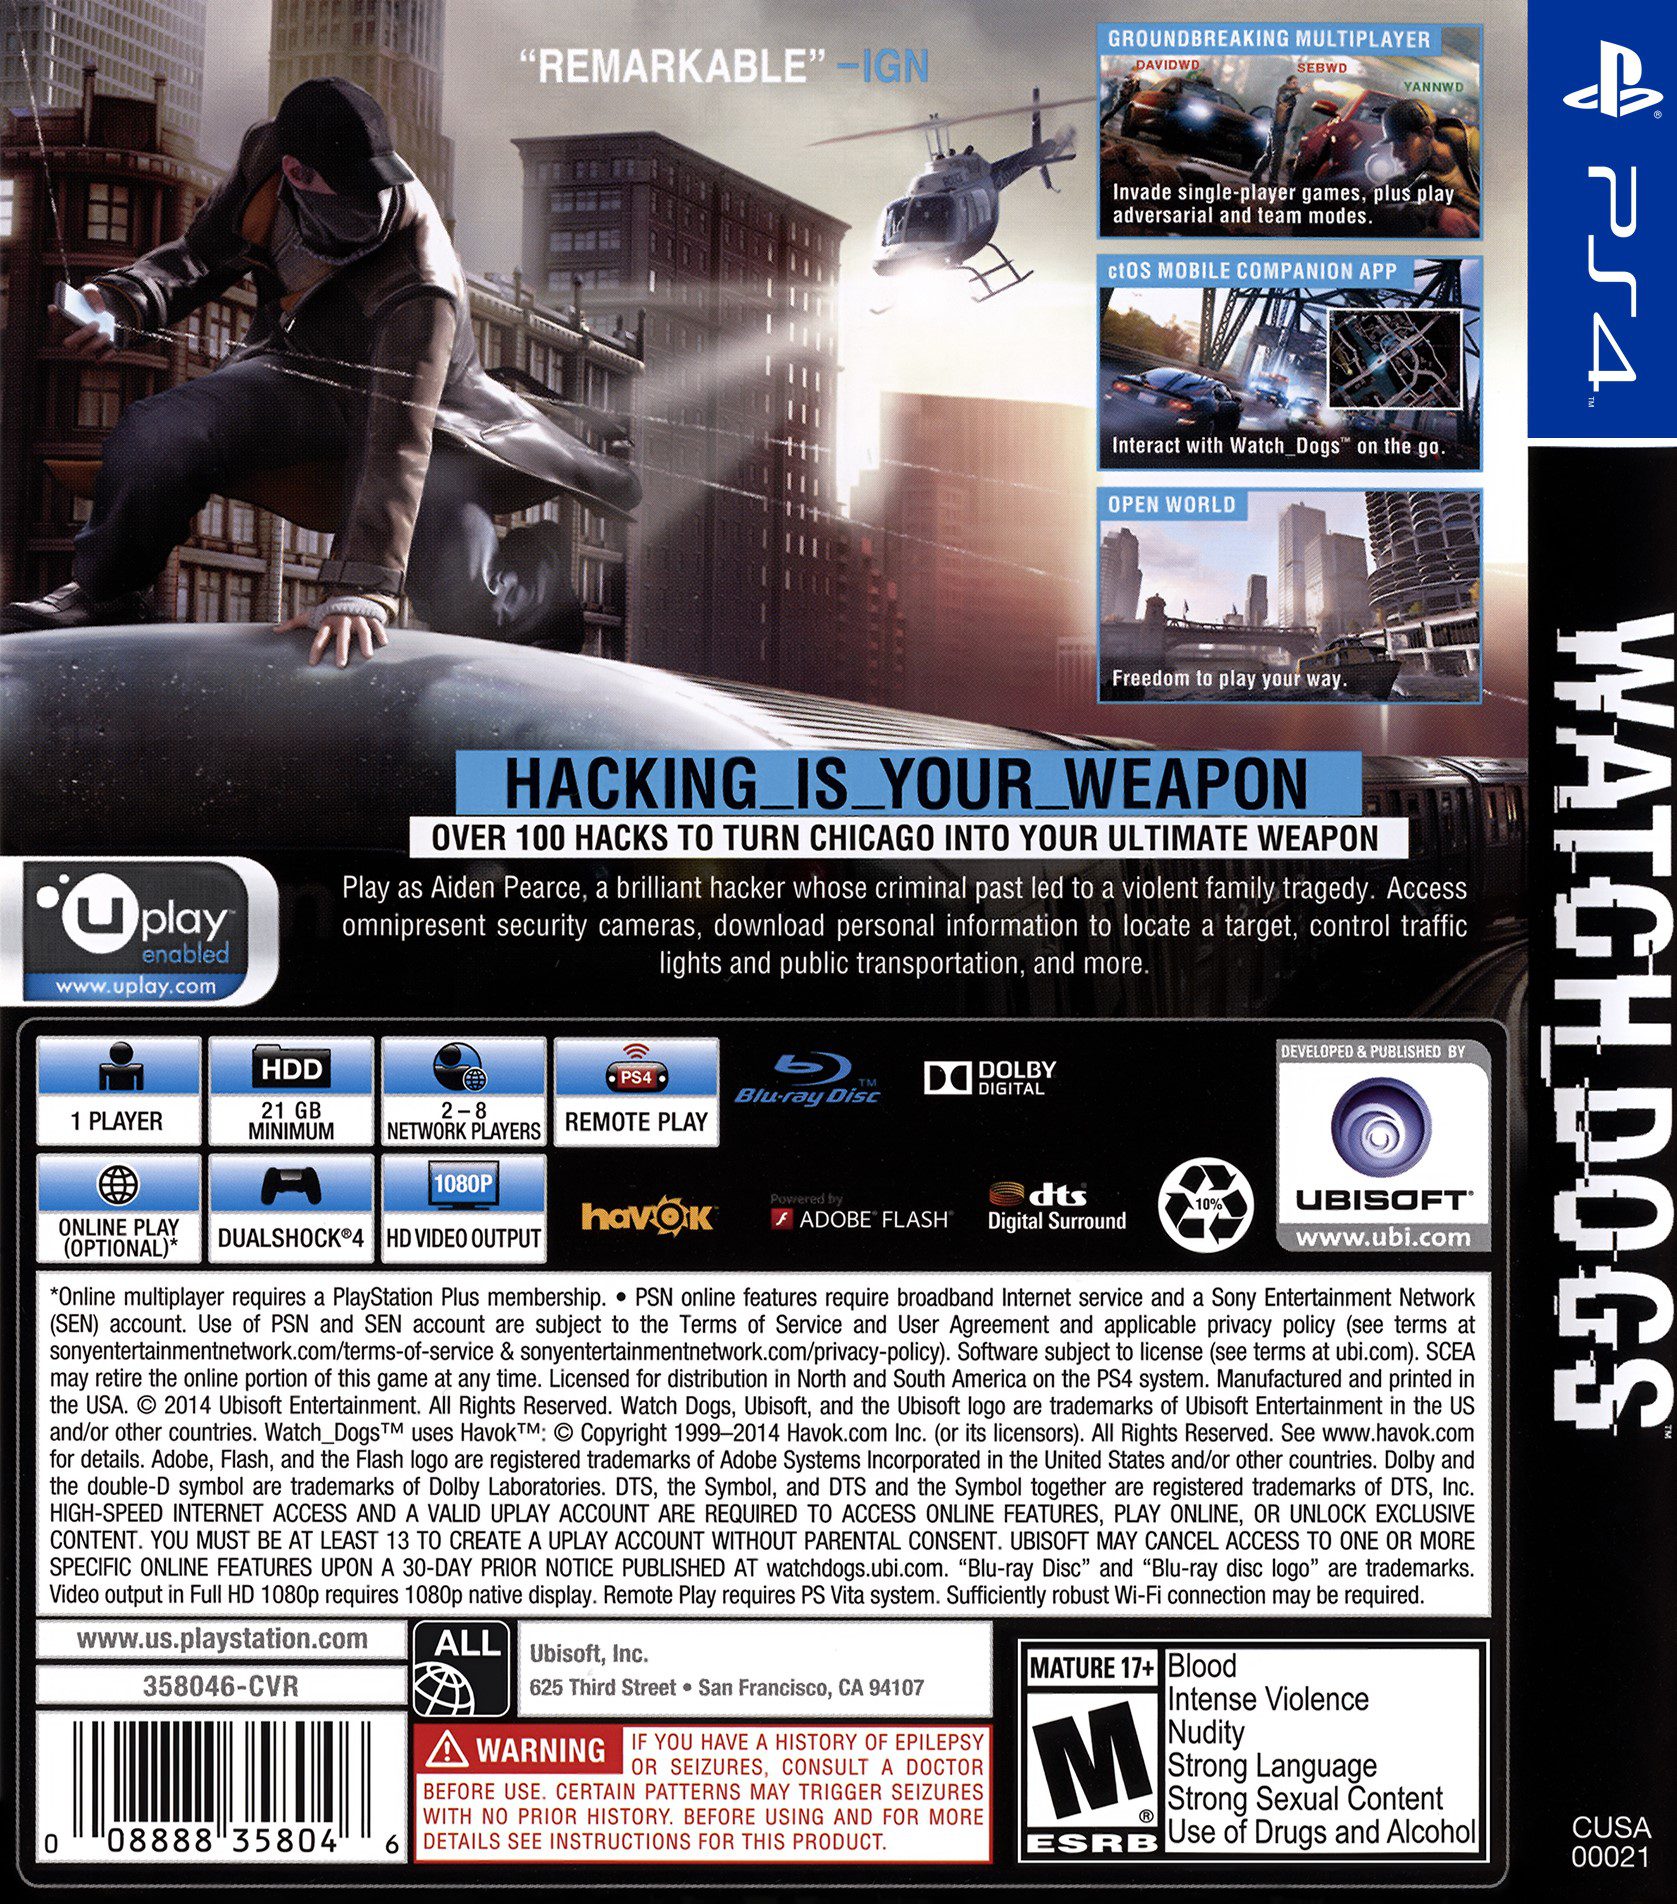 Watch Dogs PS4 Back